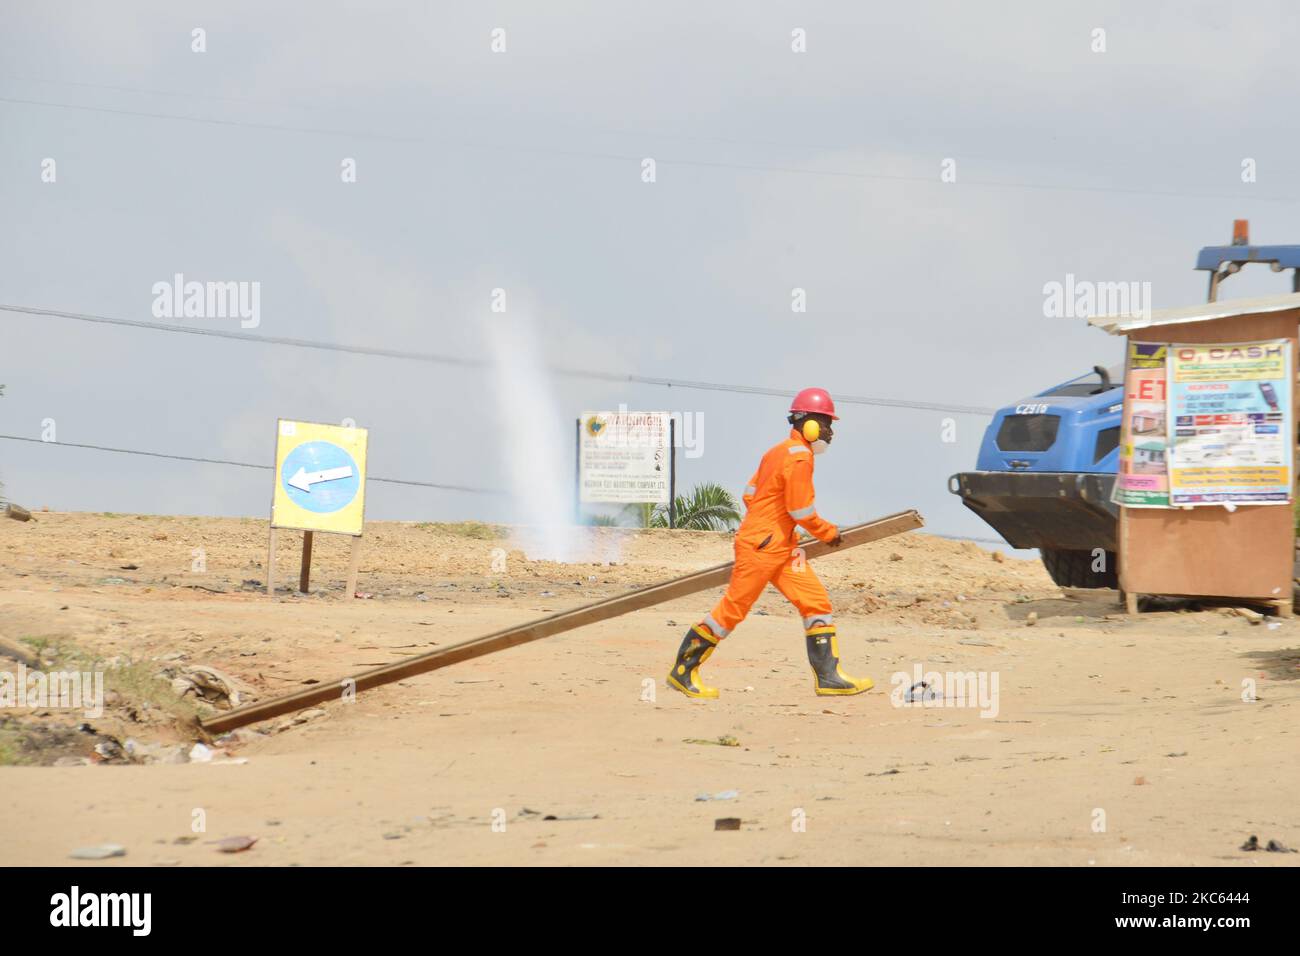 An NNPC personal barricading roads at the scene of a gas leak located around Magboro area of Ogun state was ruptured while Julius Berger Company was carrying out construction works along Lagos-Ibadan Expressway, Ogun State, Nigeria on December 16, 2020. (Photo by Olukayode Jaiyeola/NurPhoto) Stock Photo